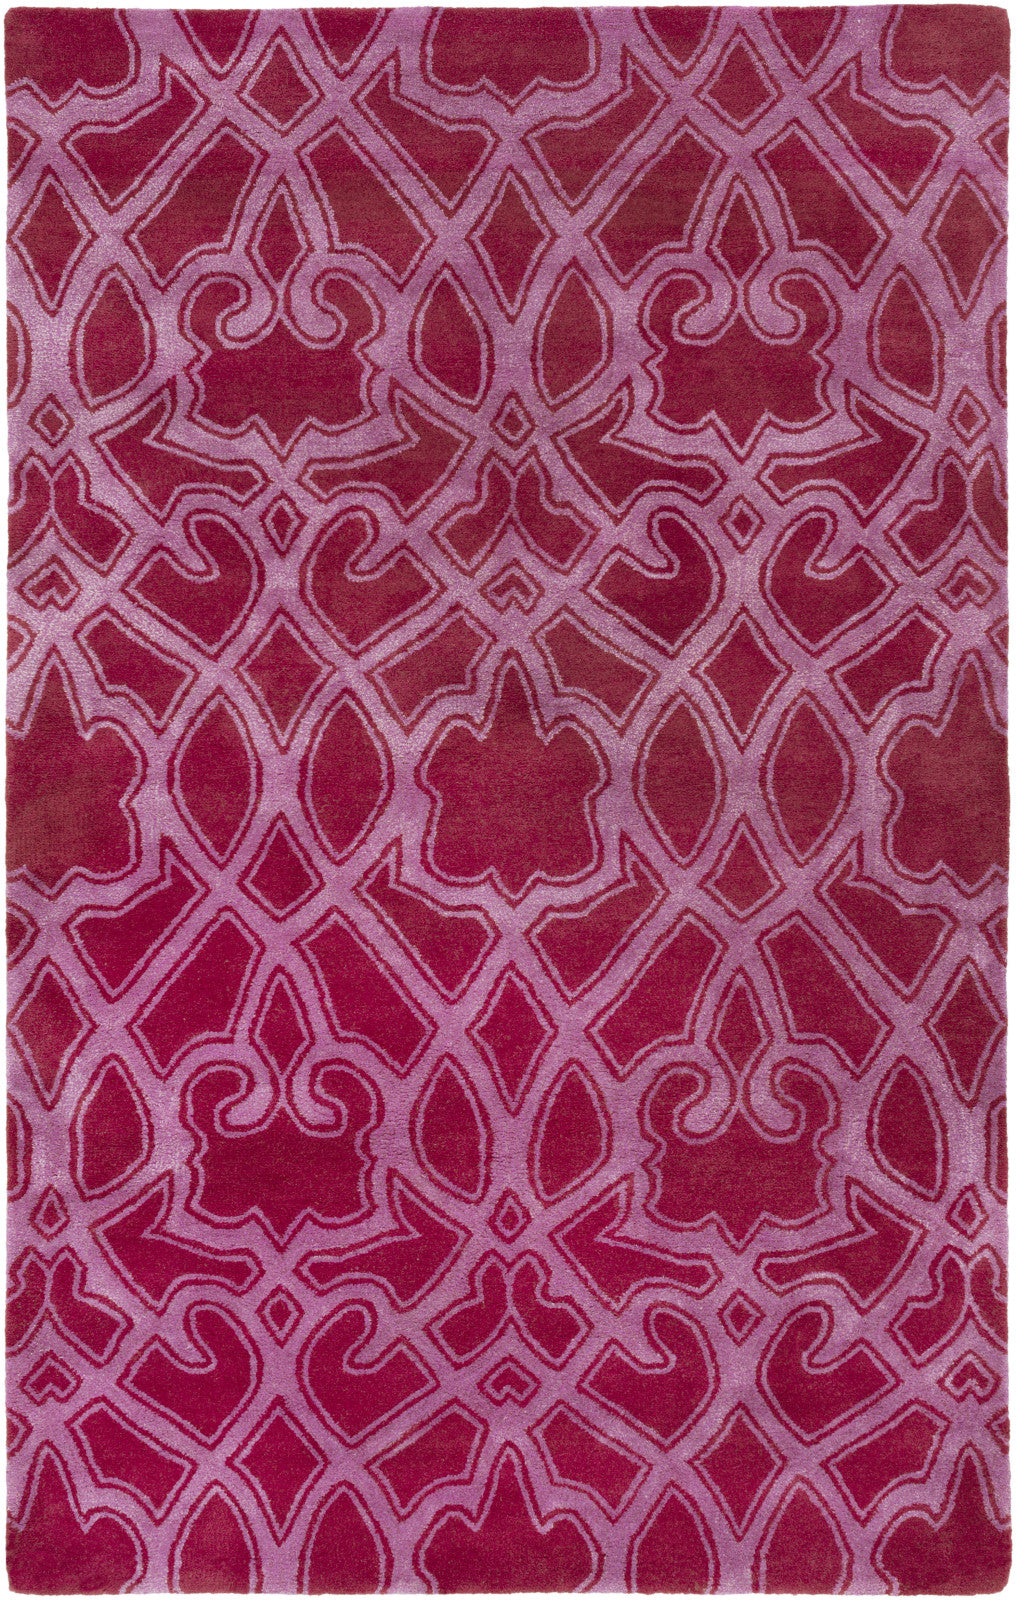 Surya Mount Perry MTP-1012 Area Rug by Florence Broadhurst